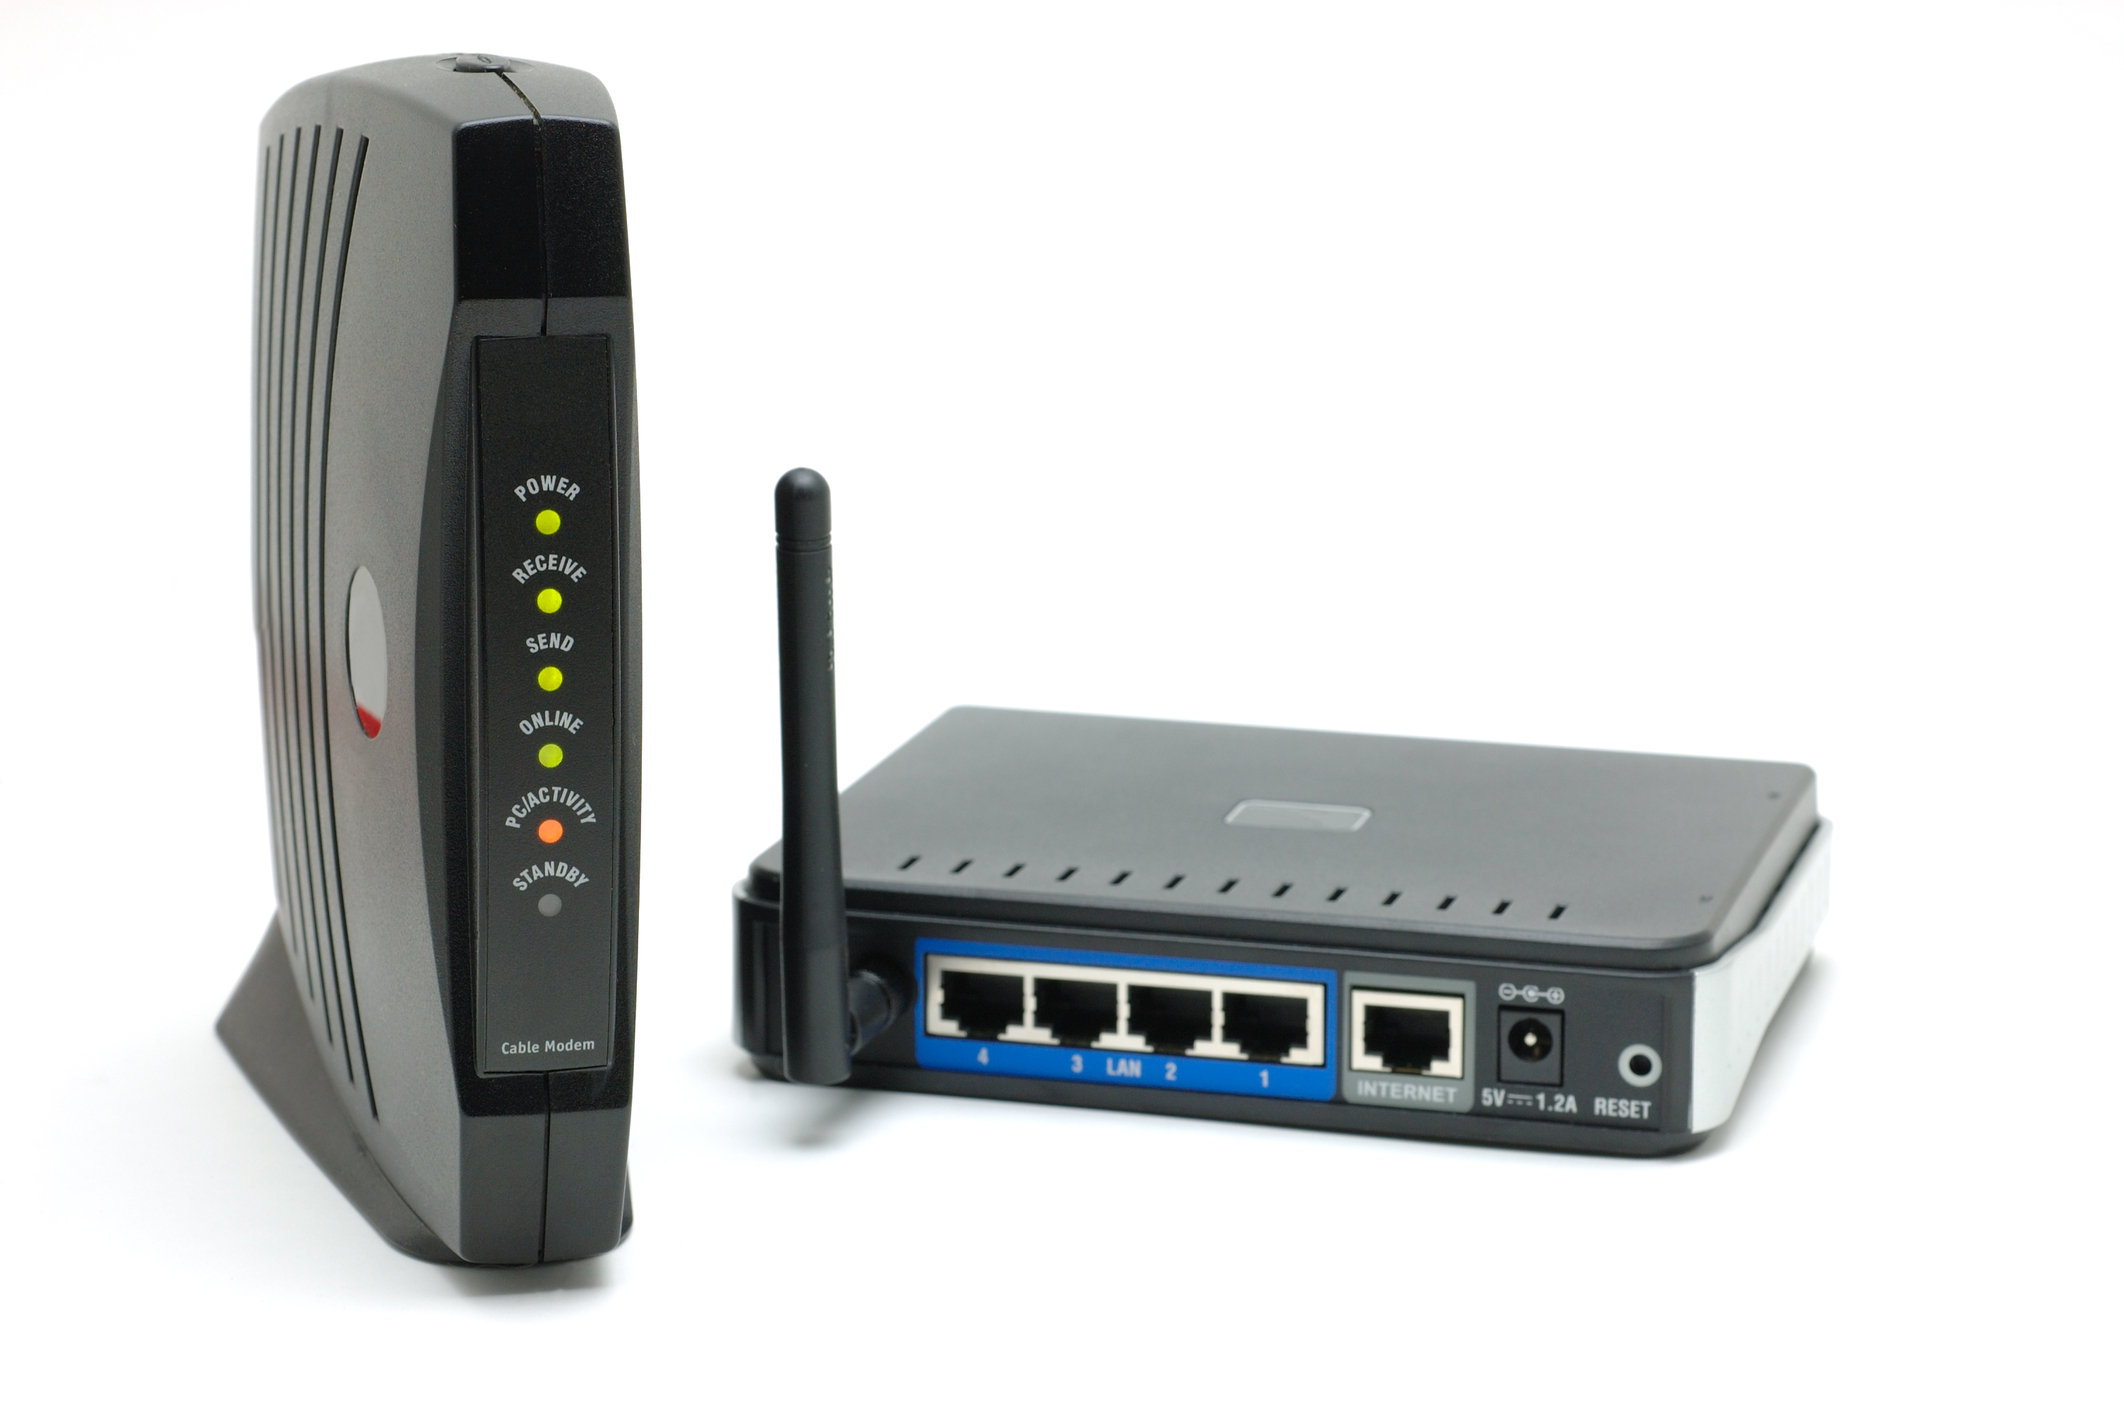 Old Routers Are Putting Your Business At Risk